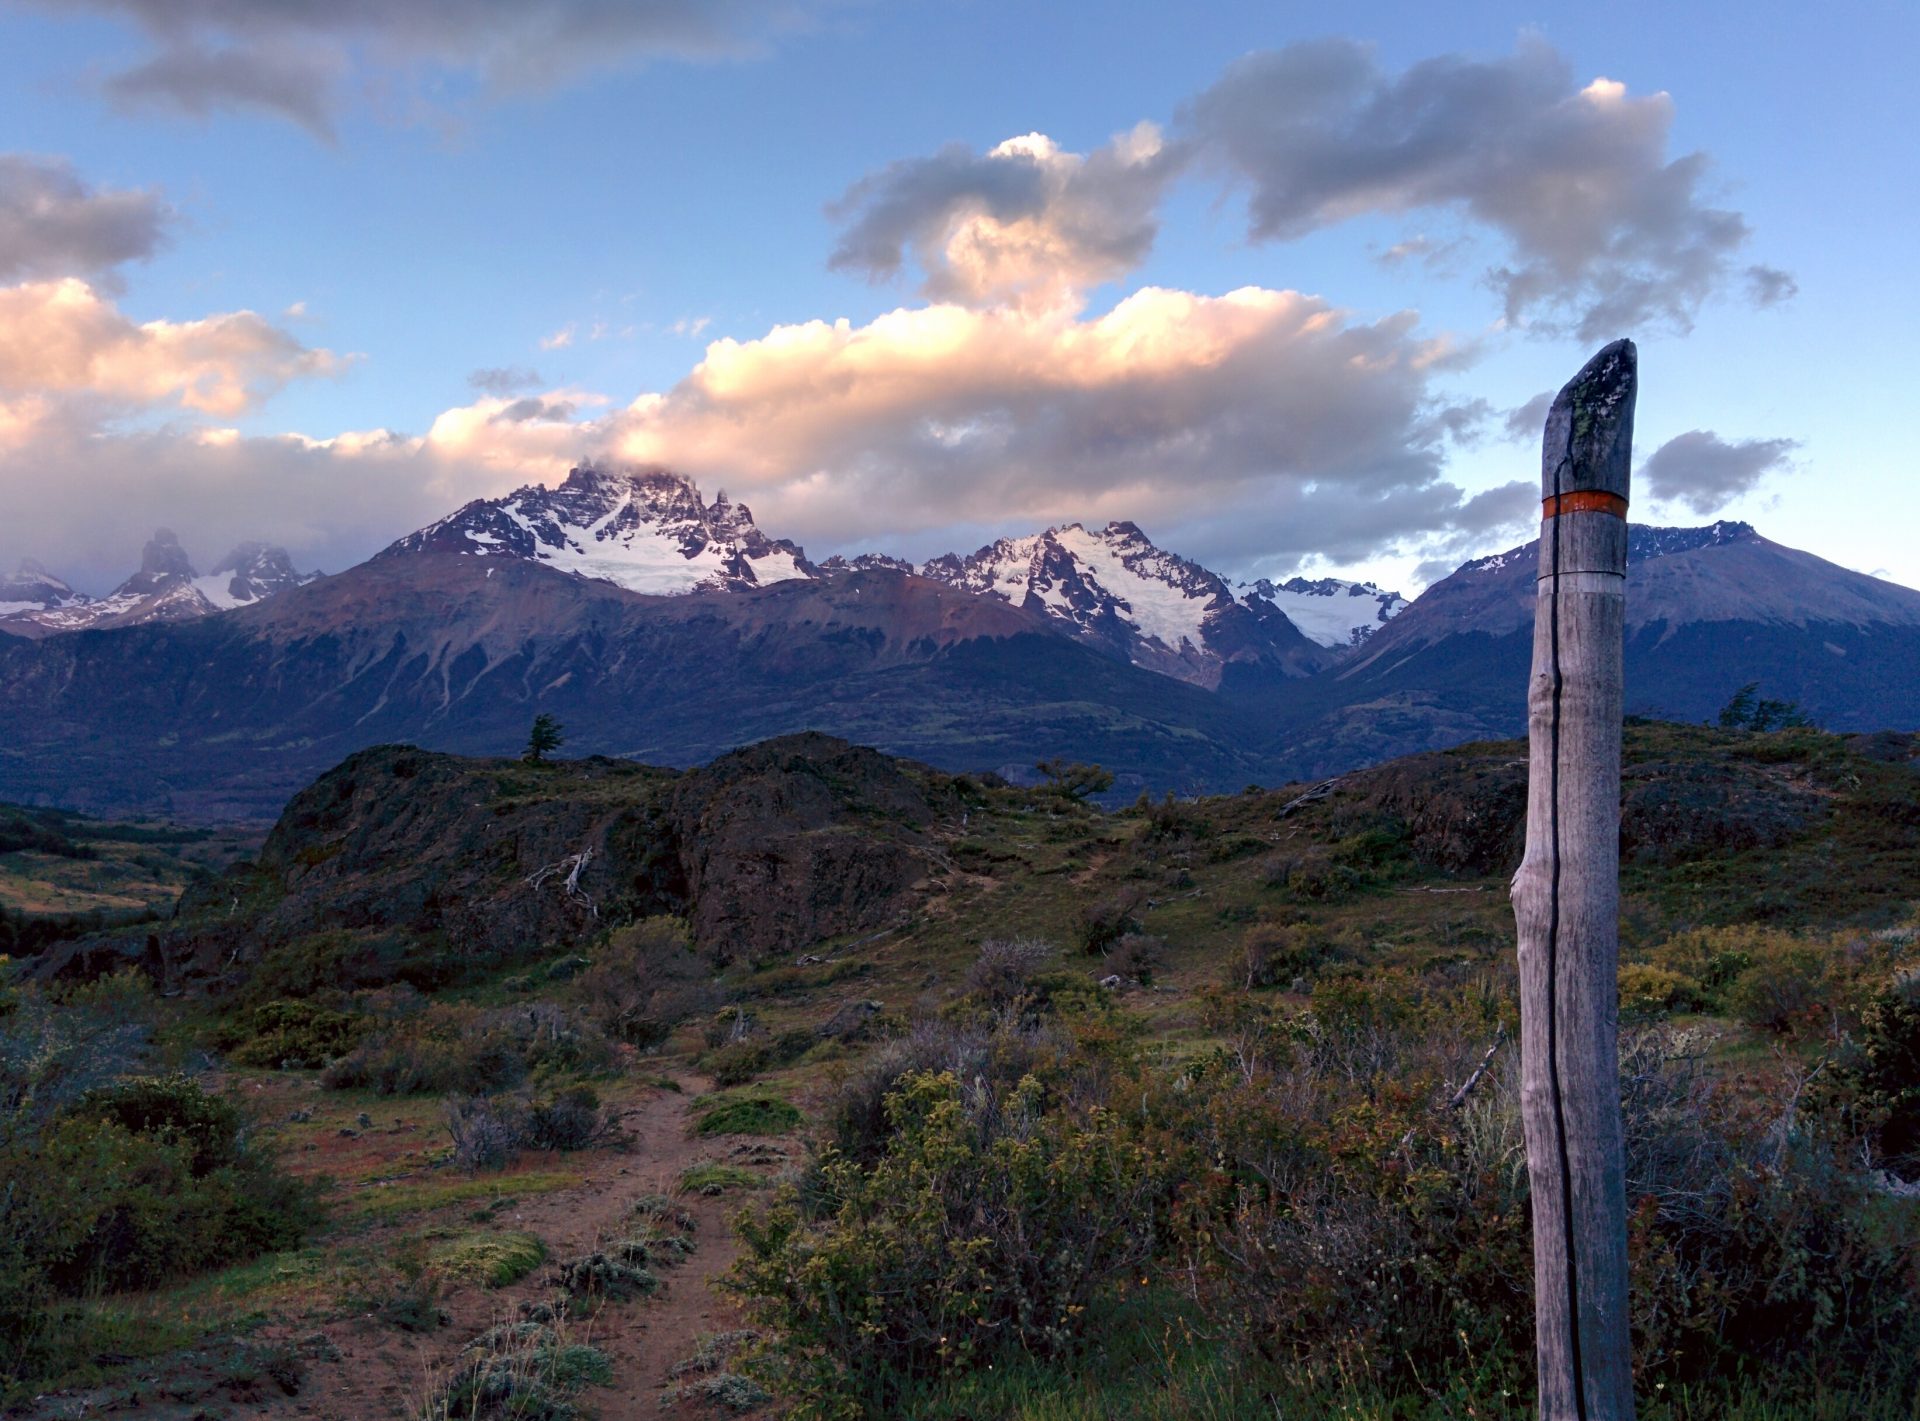 In the nature during a sunset, the Cerro Castillo in the background. There is a signpost that shows the way.